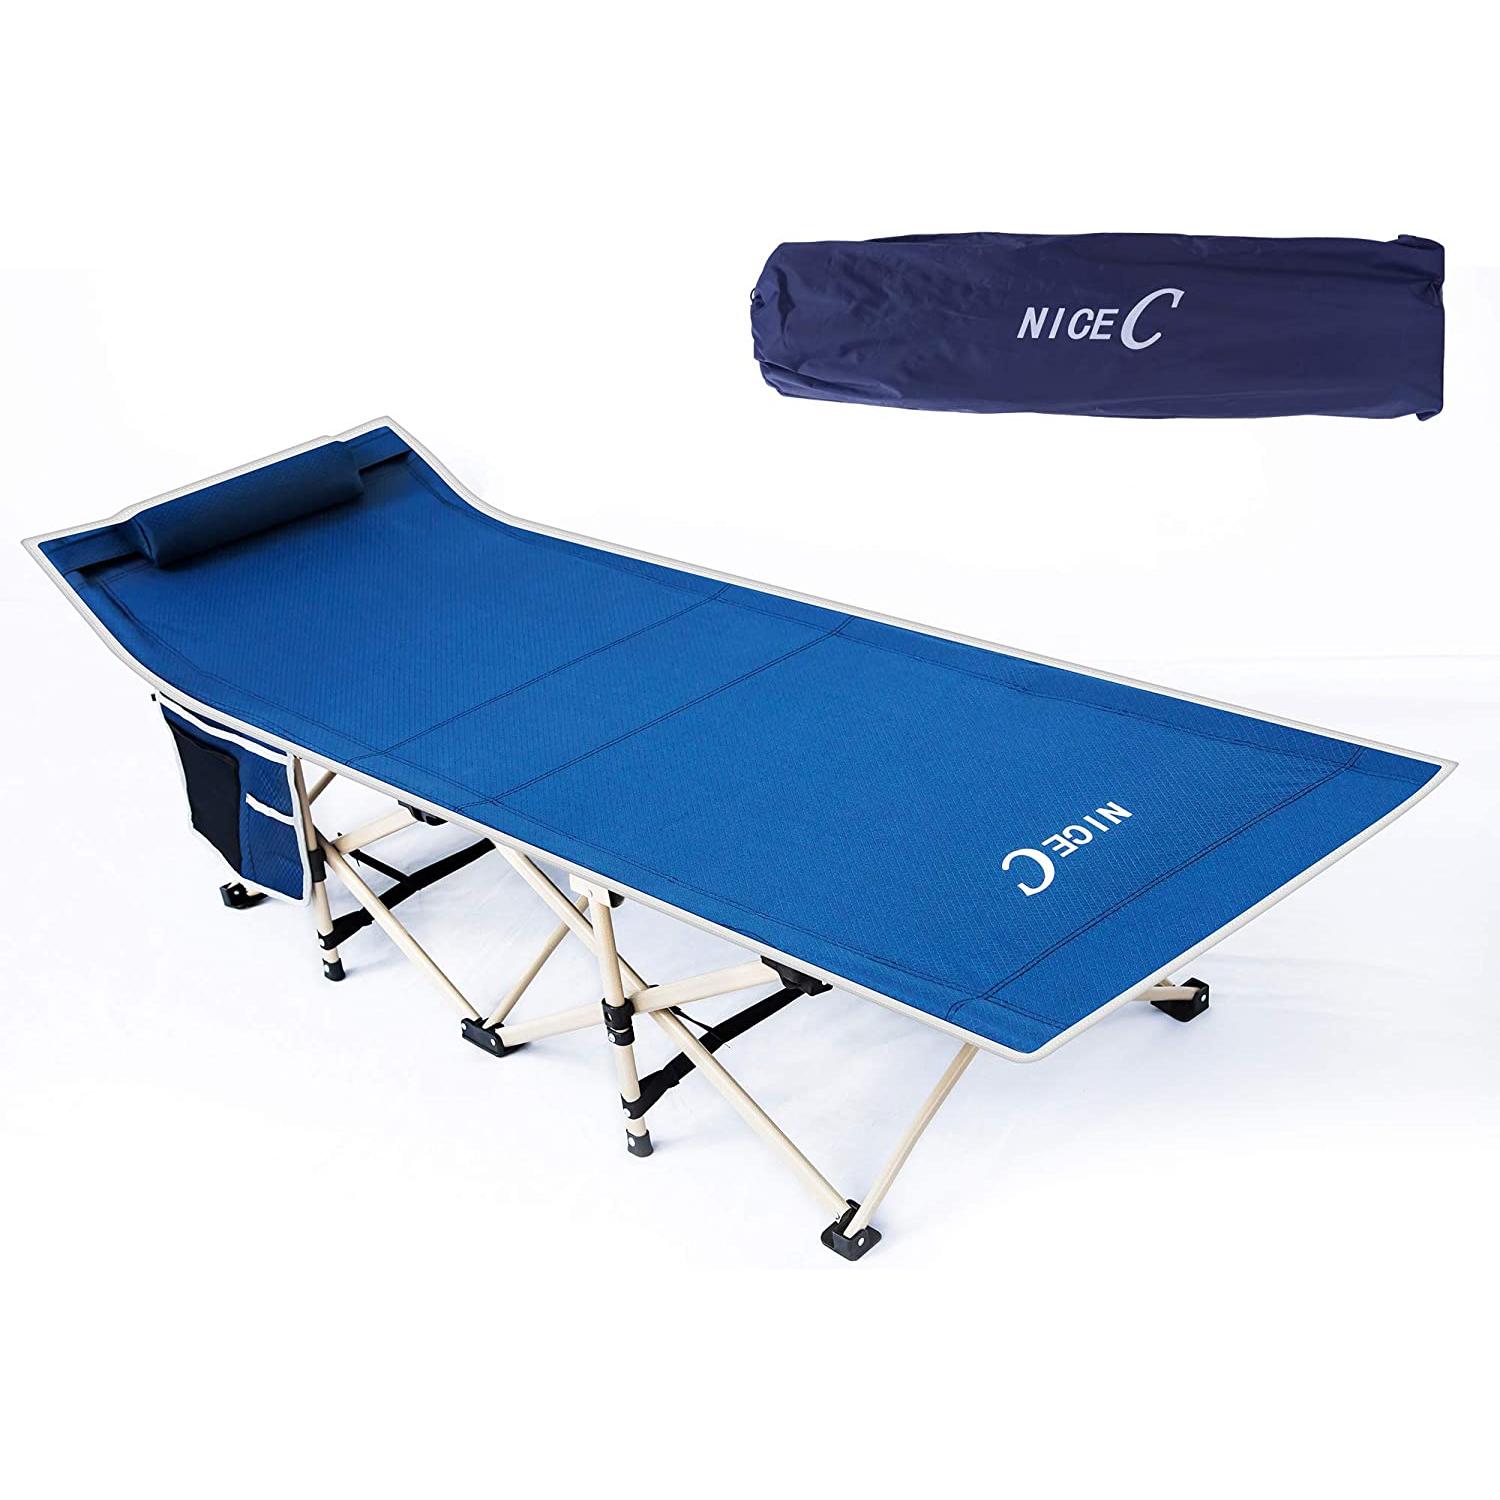 Folding Camping Cot, Sleeping Bed, Tent Cot, with Pillow, Carry Bag & Storage Bag, Extra Wide Sturdy, Heavy Duty Holds Up to 500 Lbs, Lightweight, Comfortable